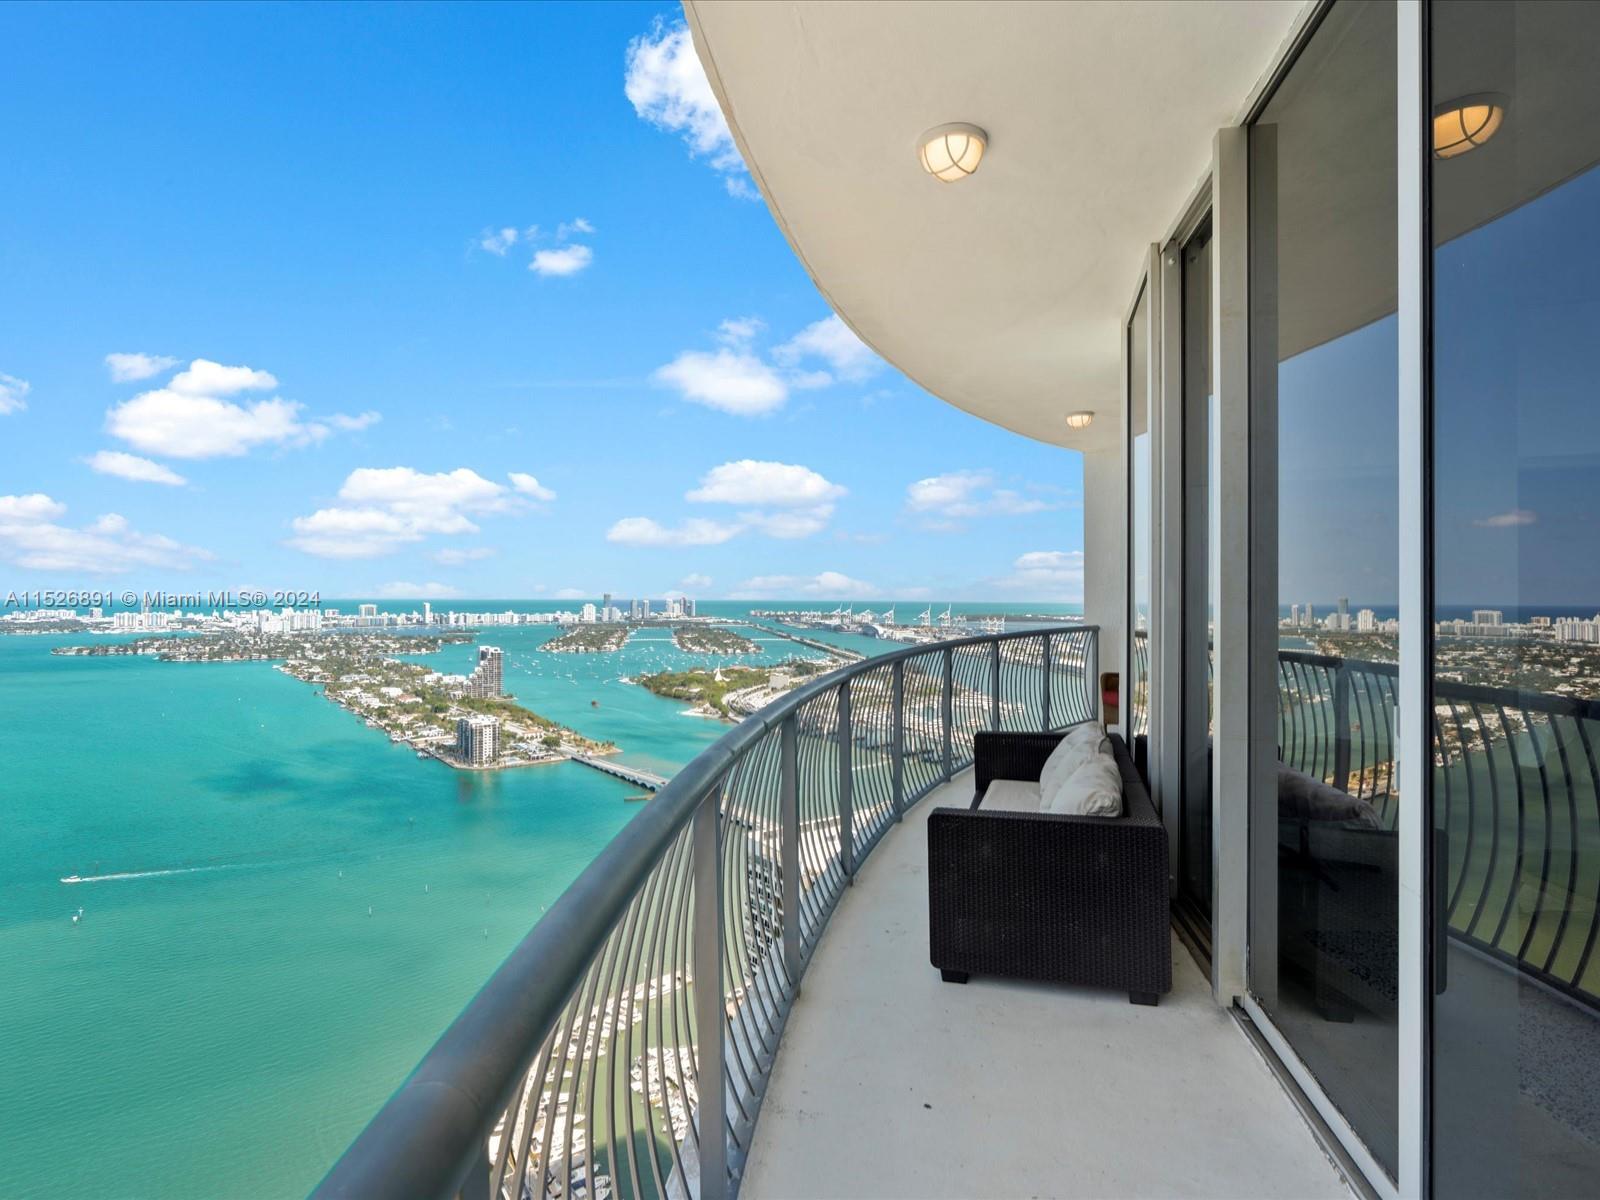 Your opportunity to live in THE best unit in the building. The top floor Penthouse Tower Suite, 56th level, '01 line with 12-foot high ceilings, washer/dryer, & premium parking space for fast access. Unparalleled unobstructed Eastern views of Biscayne Bay, Atlantic Ocean, & Miami Beach. Furnished or unfurnished. State-of-the-art fitness center, pool, facial recognition security throughout, 24 hr Mini Market, wine market, barber shop, on-site restaurant & bar, valet, + security. Outside your front door is Pura Vida, Casadonna, and Margaret Pace Park w/ Tennis, Volleyball, Basketball, Jogging Path, Dog Park, BBQ, etc. Minutes from Downtown, Art & Entertainment District, Wynwood, Midtown & Design District, 10 min to South Beach & steps to pedestrian-friendly Venetian Causeway. Not Short Term.